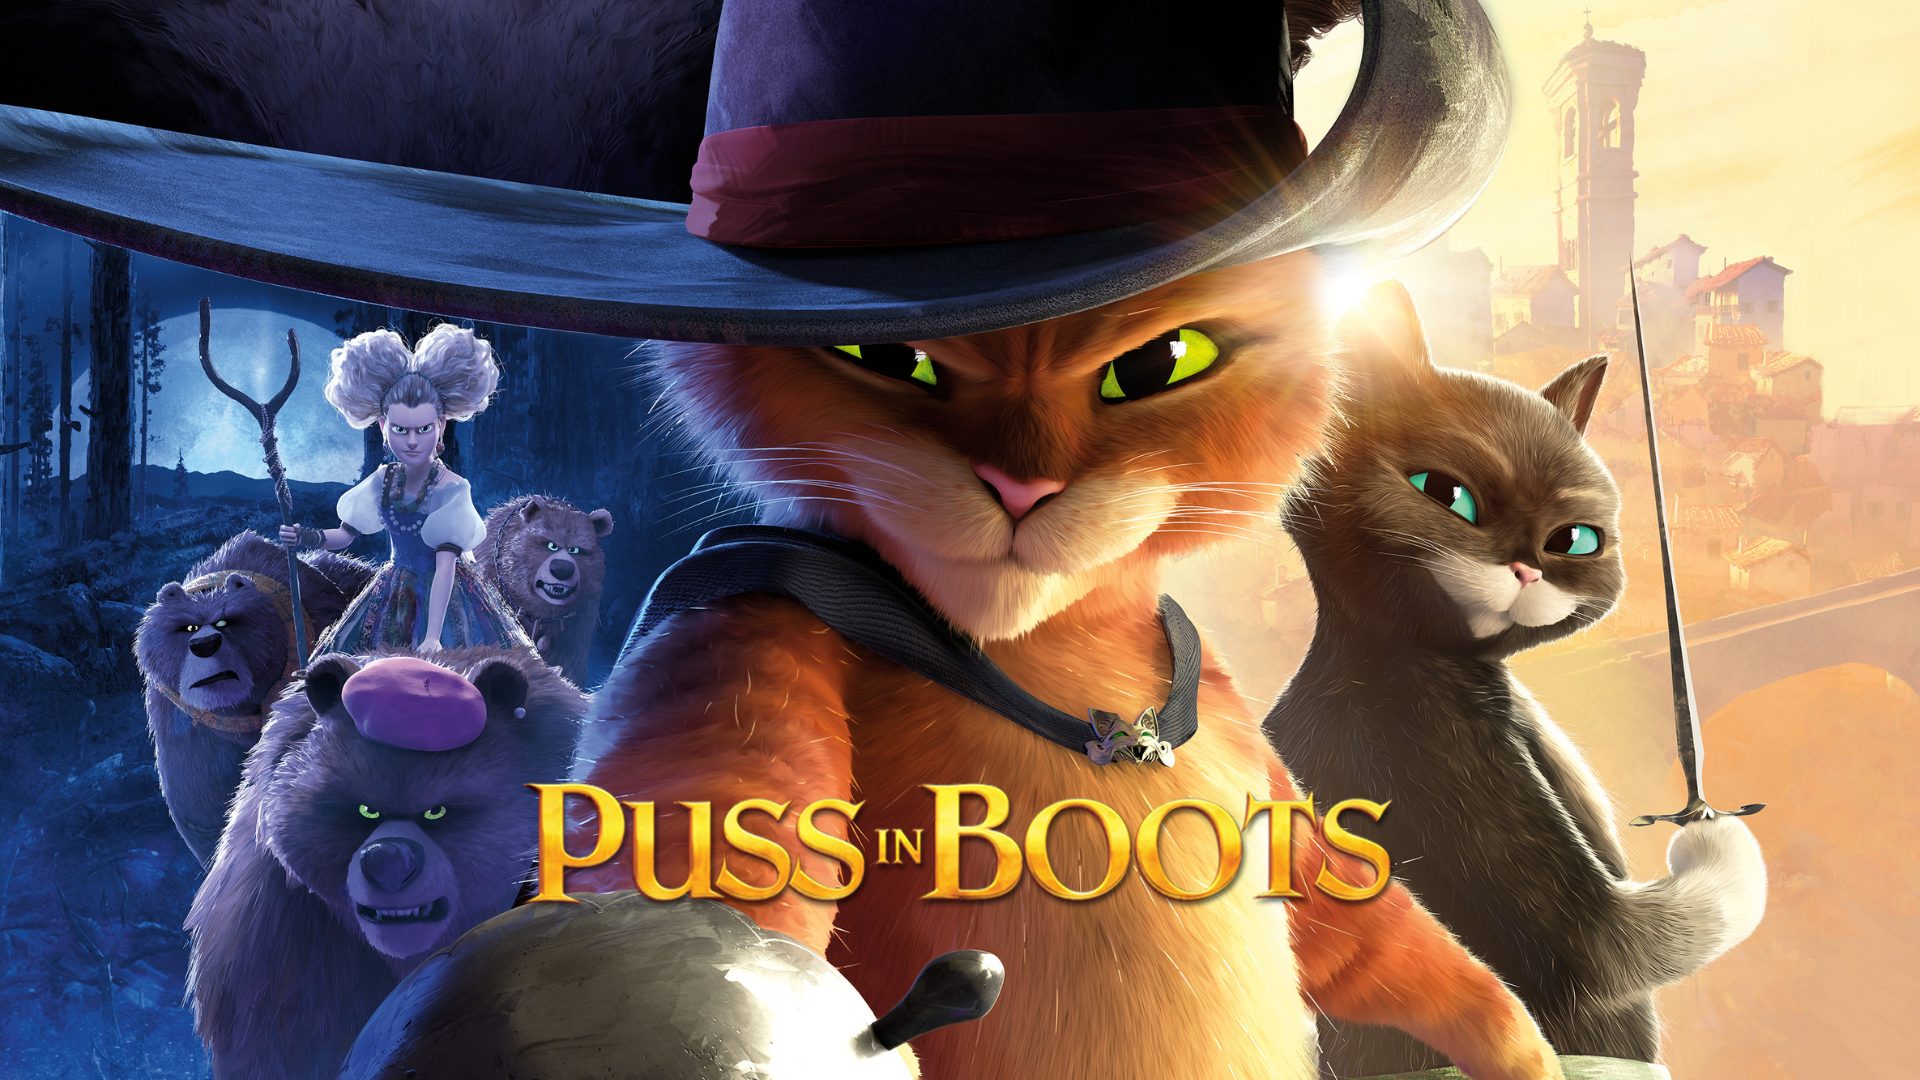 Puss in Boots (2011) Google Drive Download